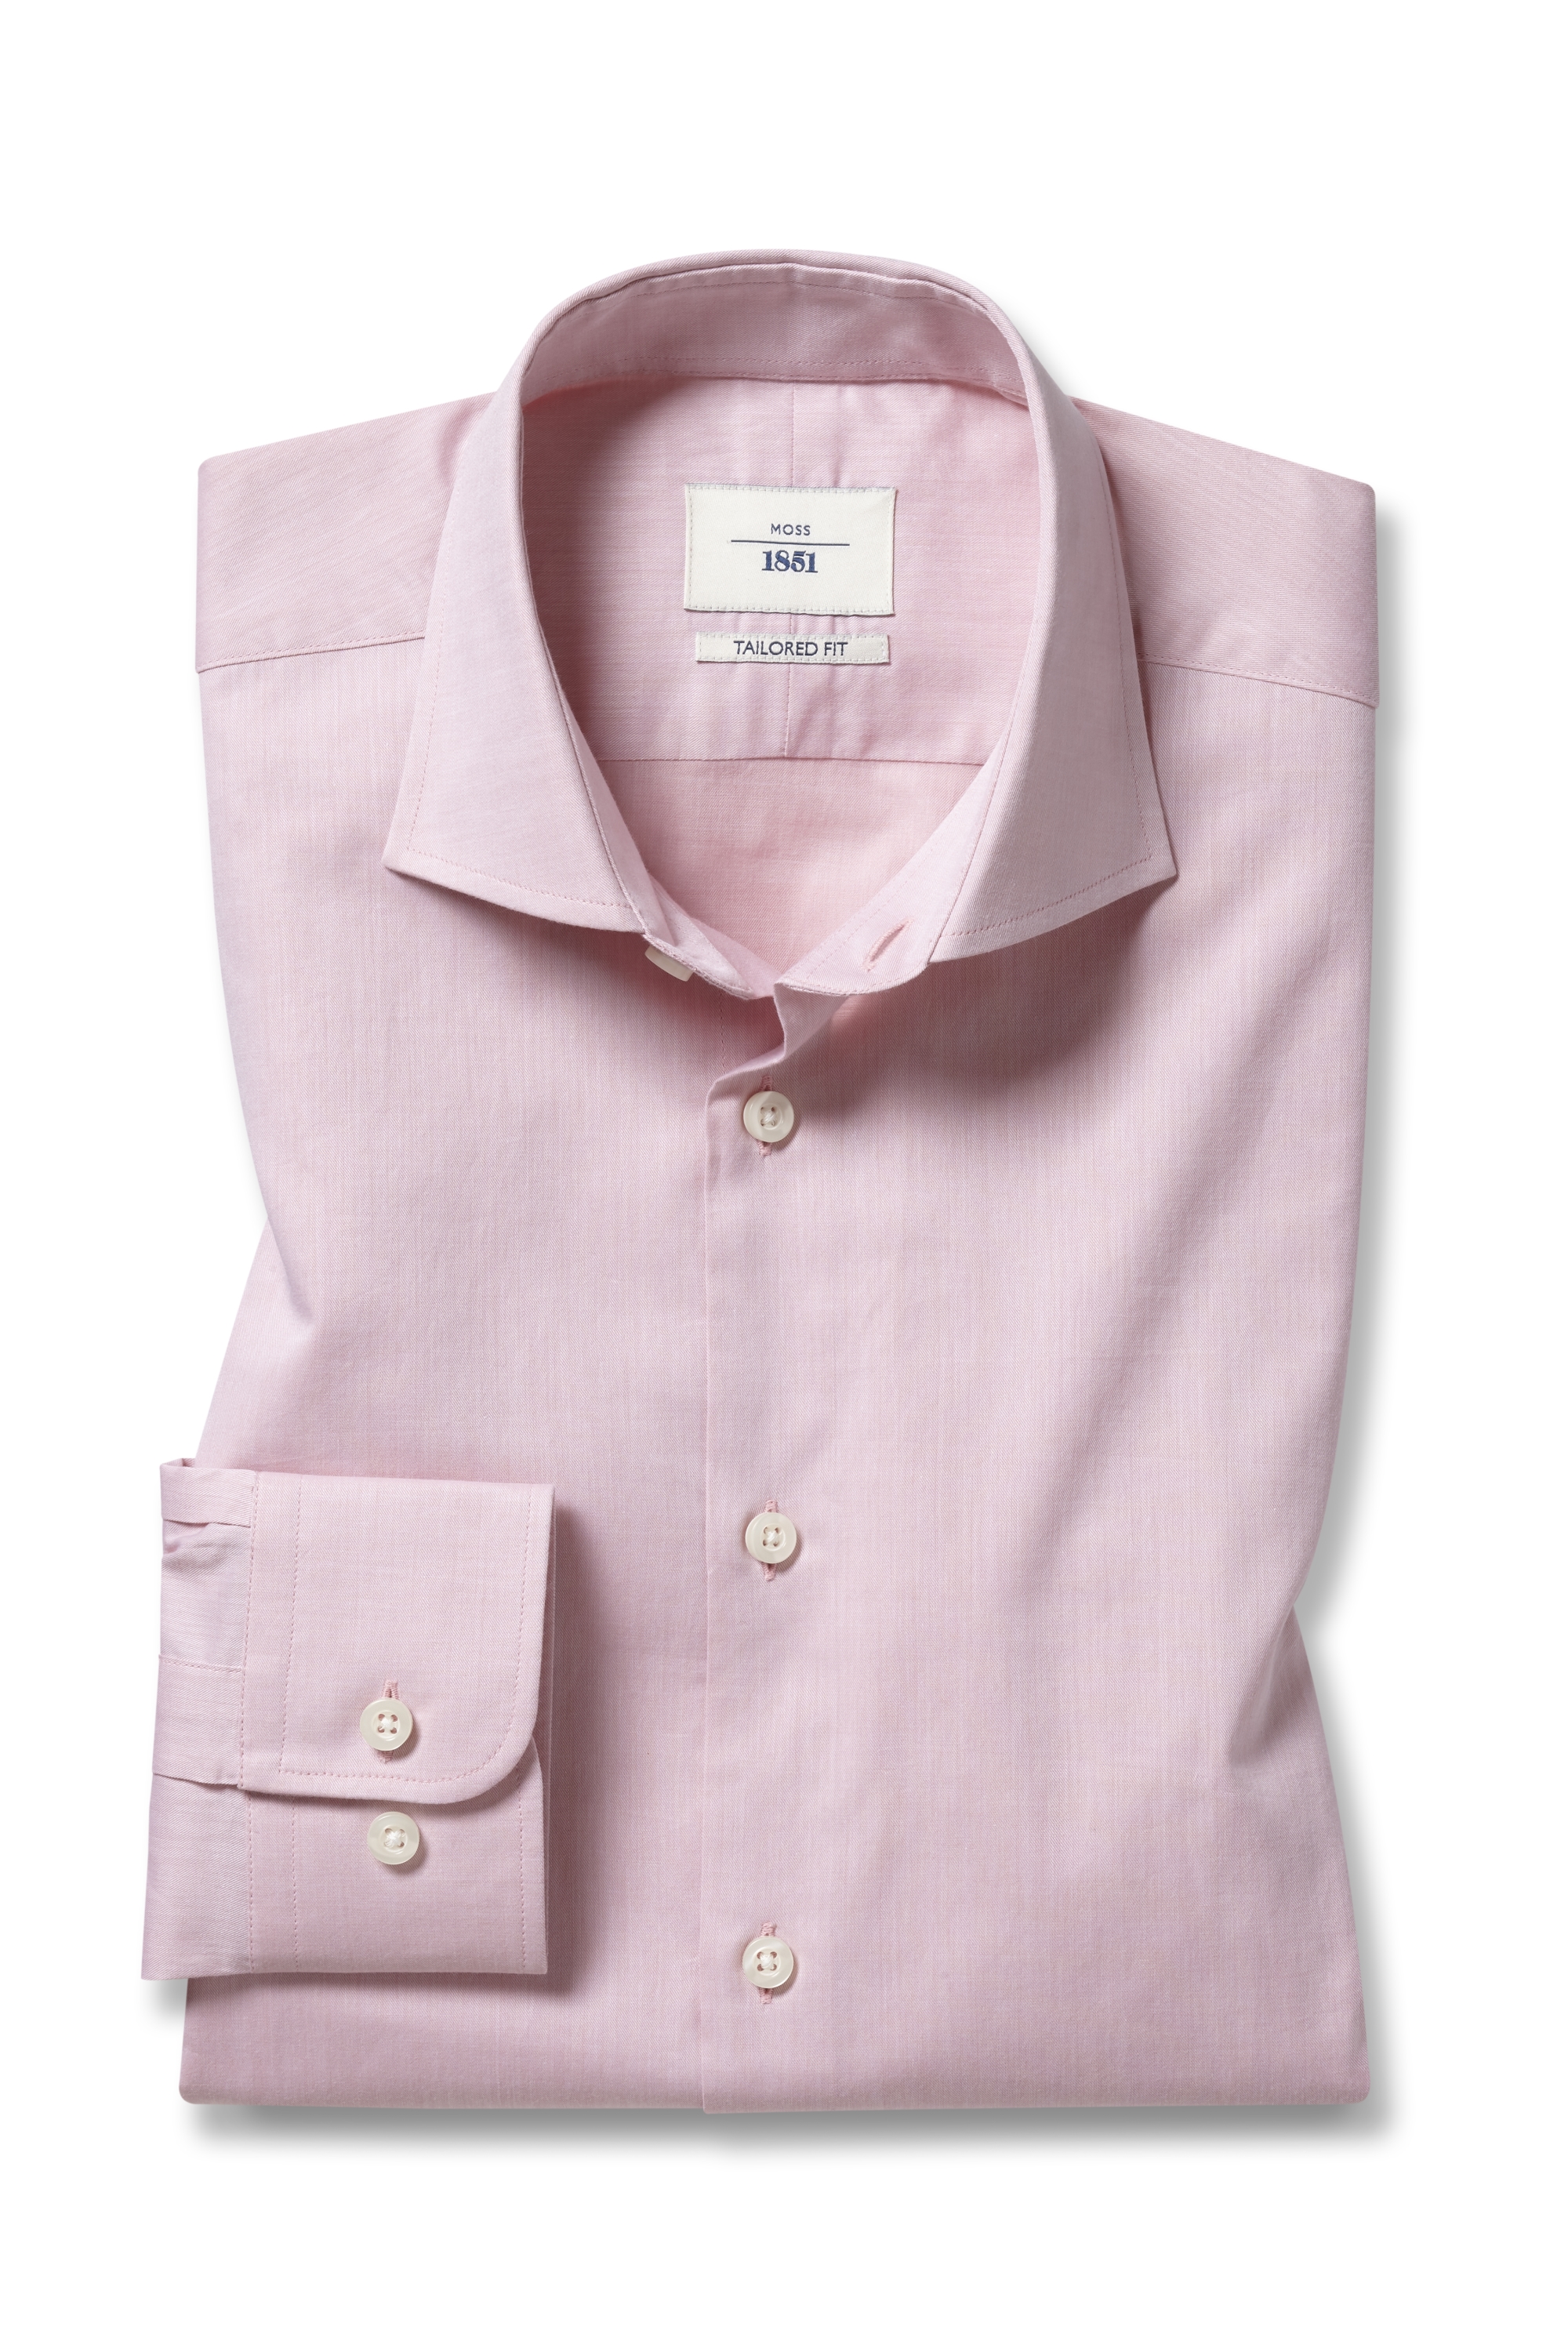 Tailored Fit Egyption Cotton Pink Twill Shirt | Buy Online at Moss